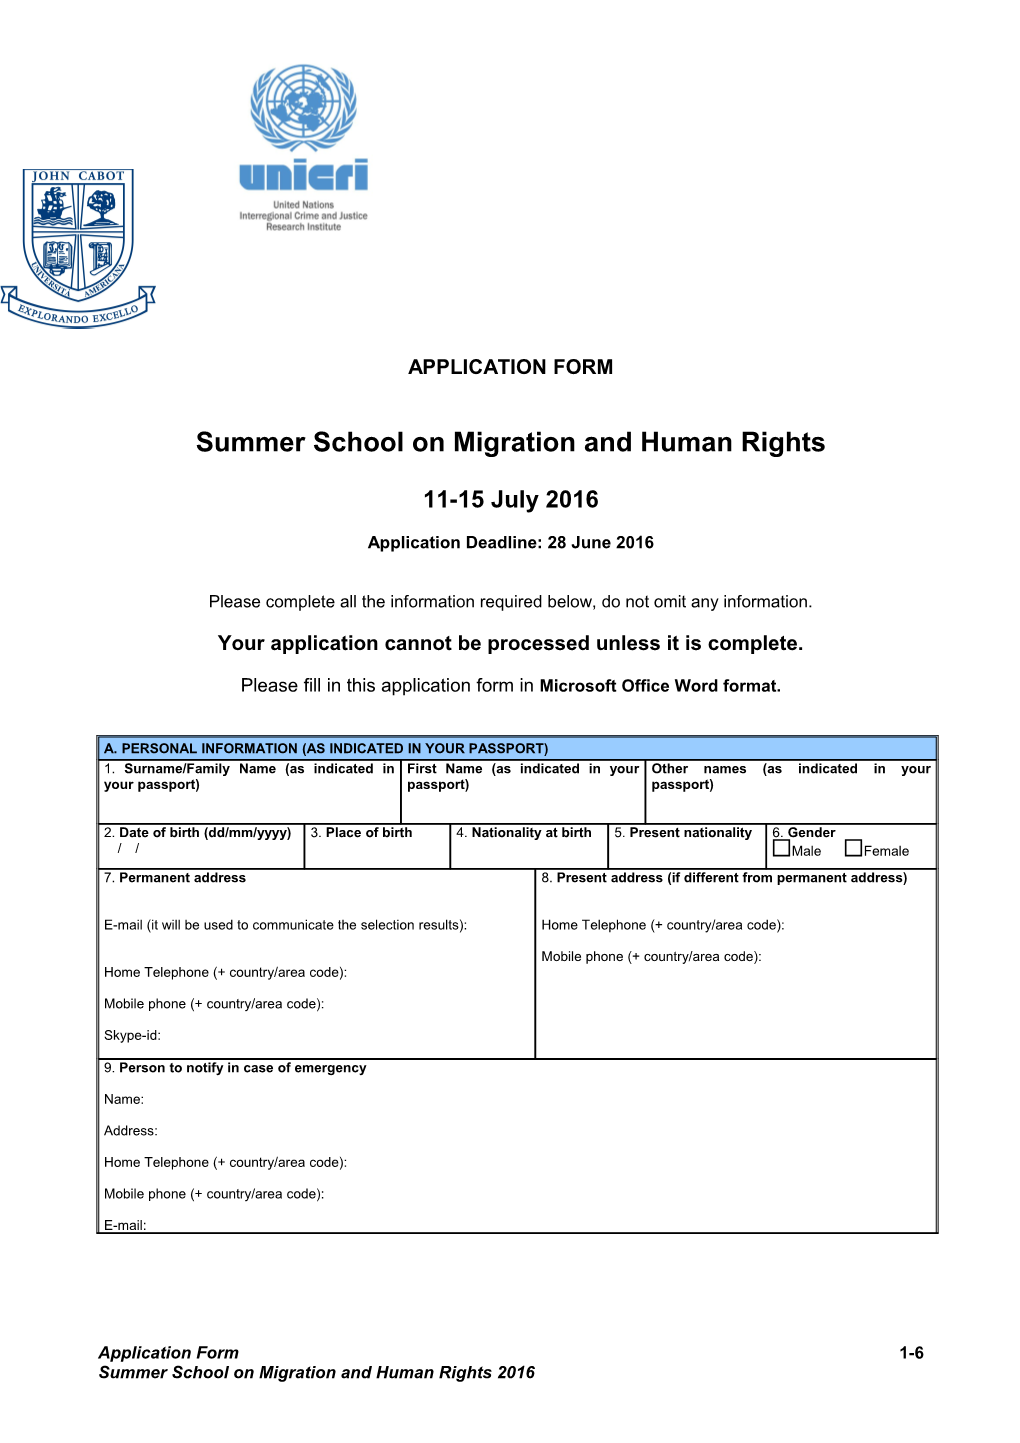 Summer School Onmigration and Human Rights